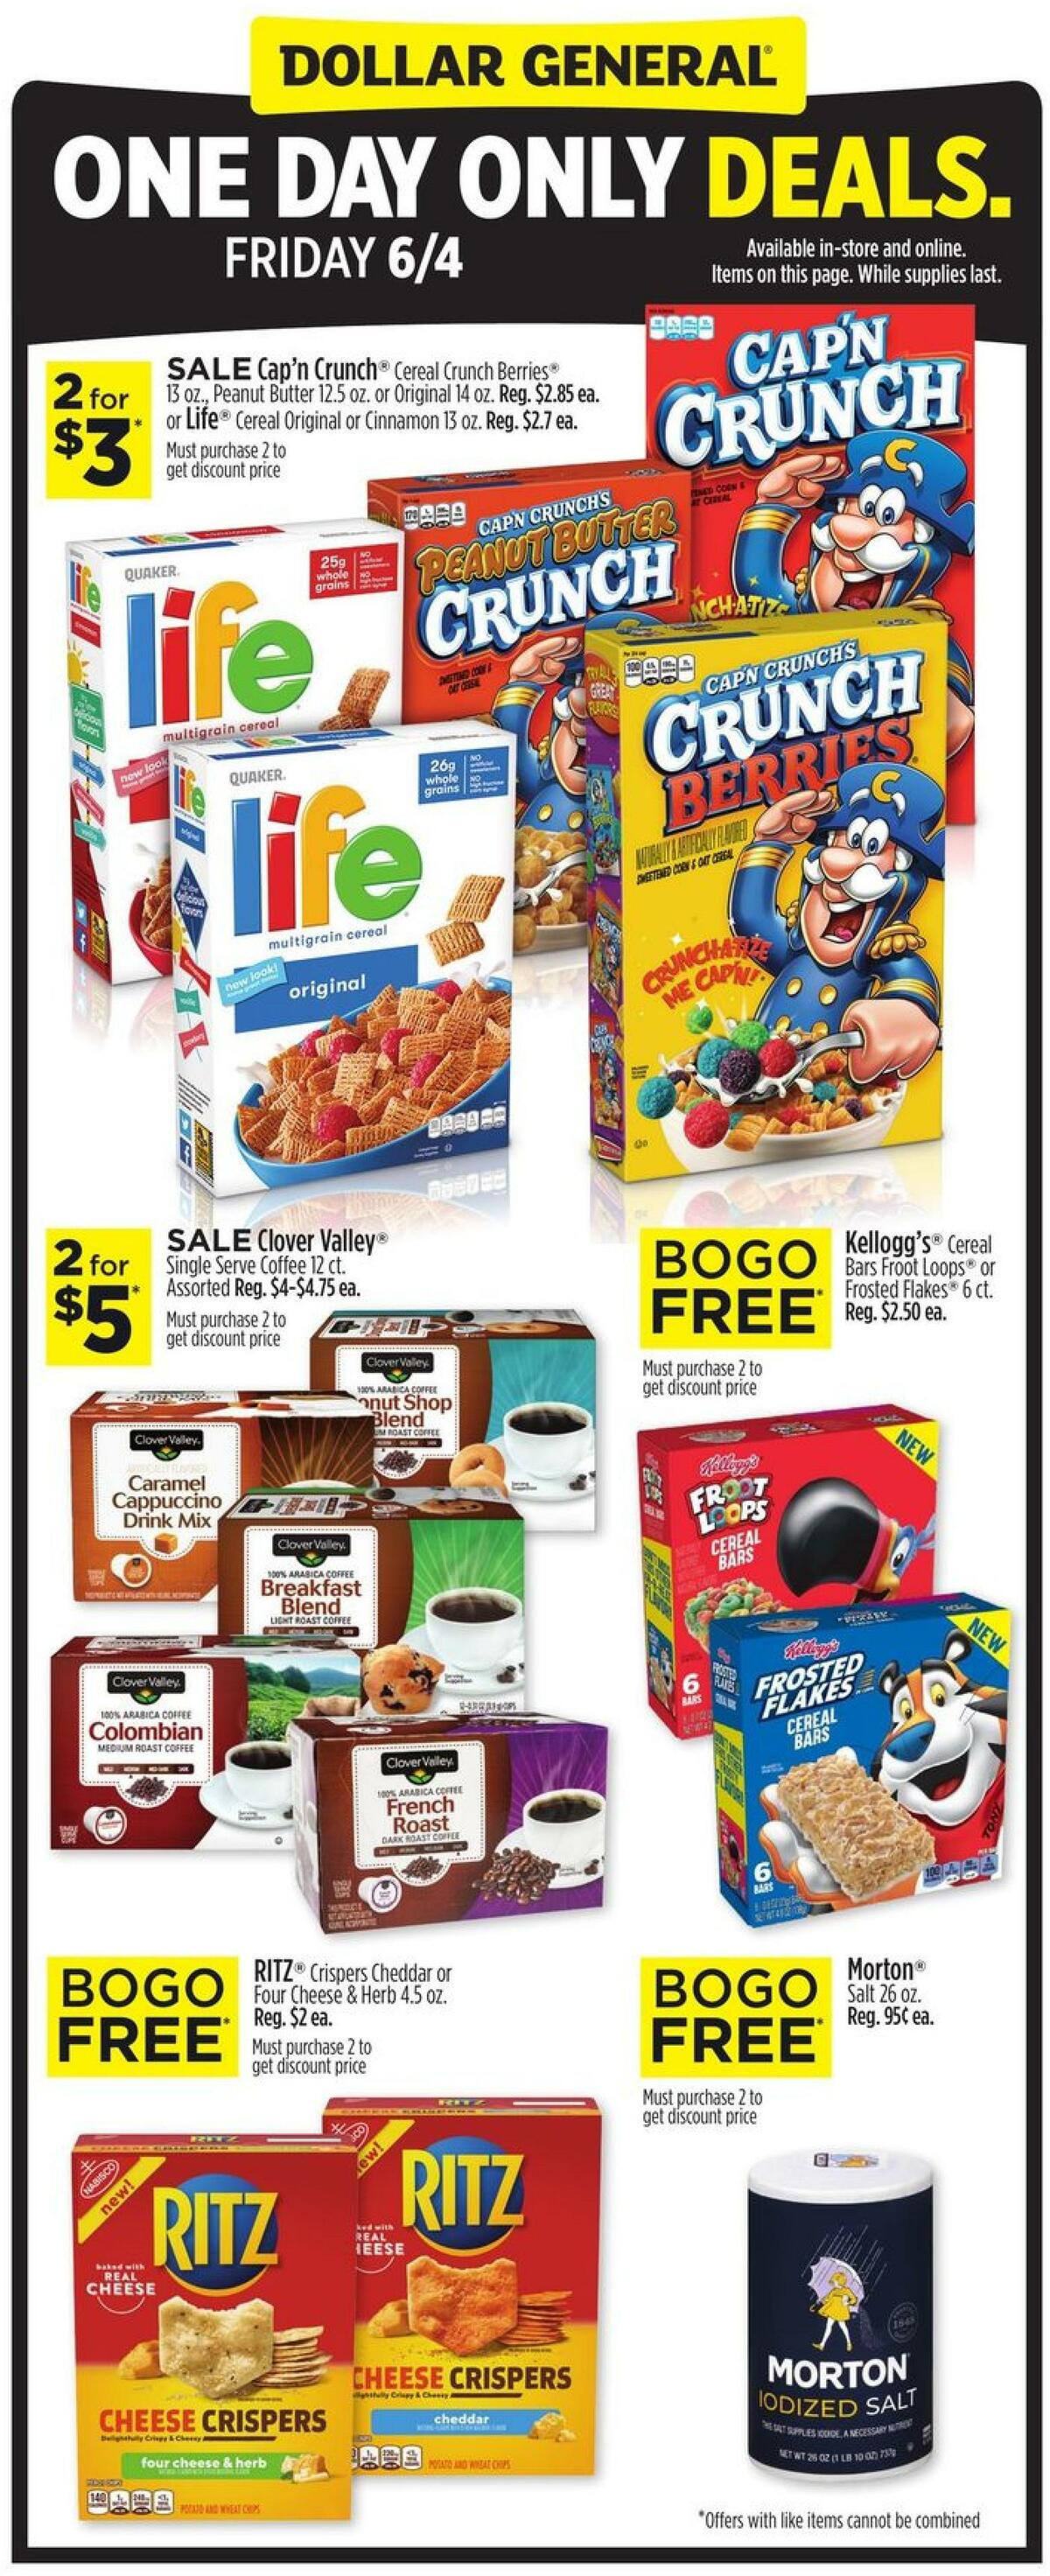 Dollar General One Day Only Deals Weekly Ad from June 4